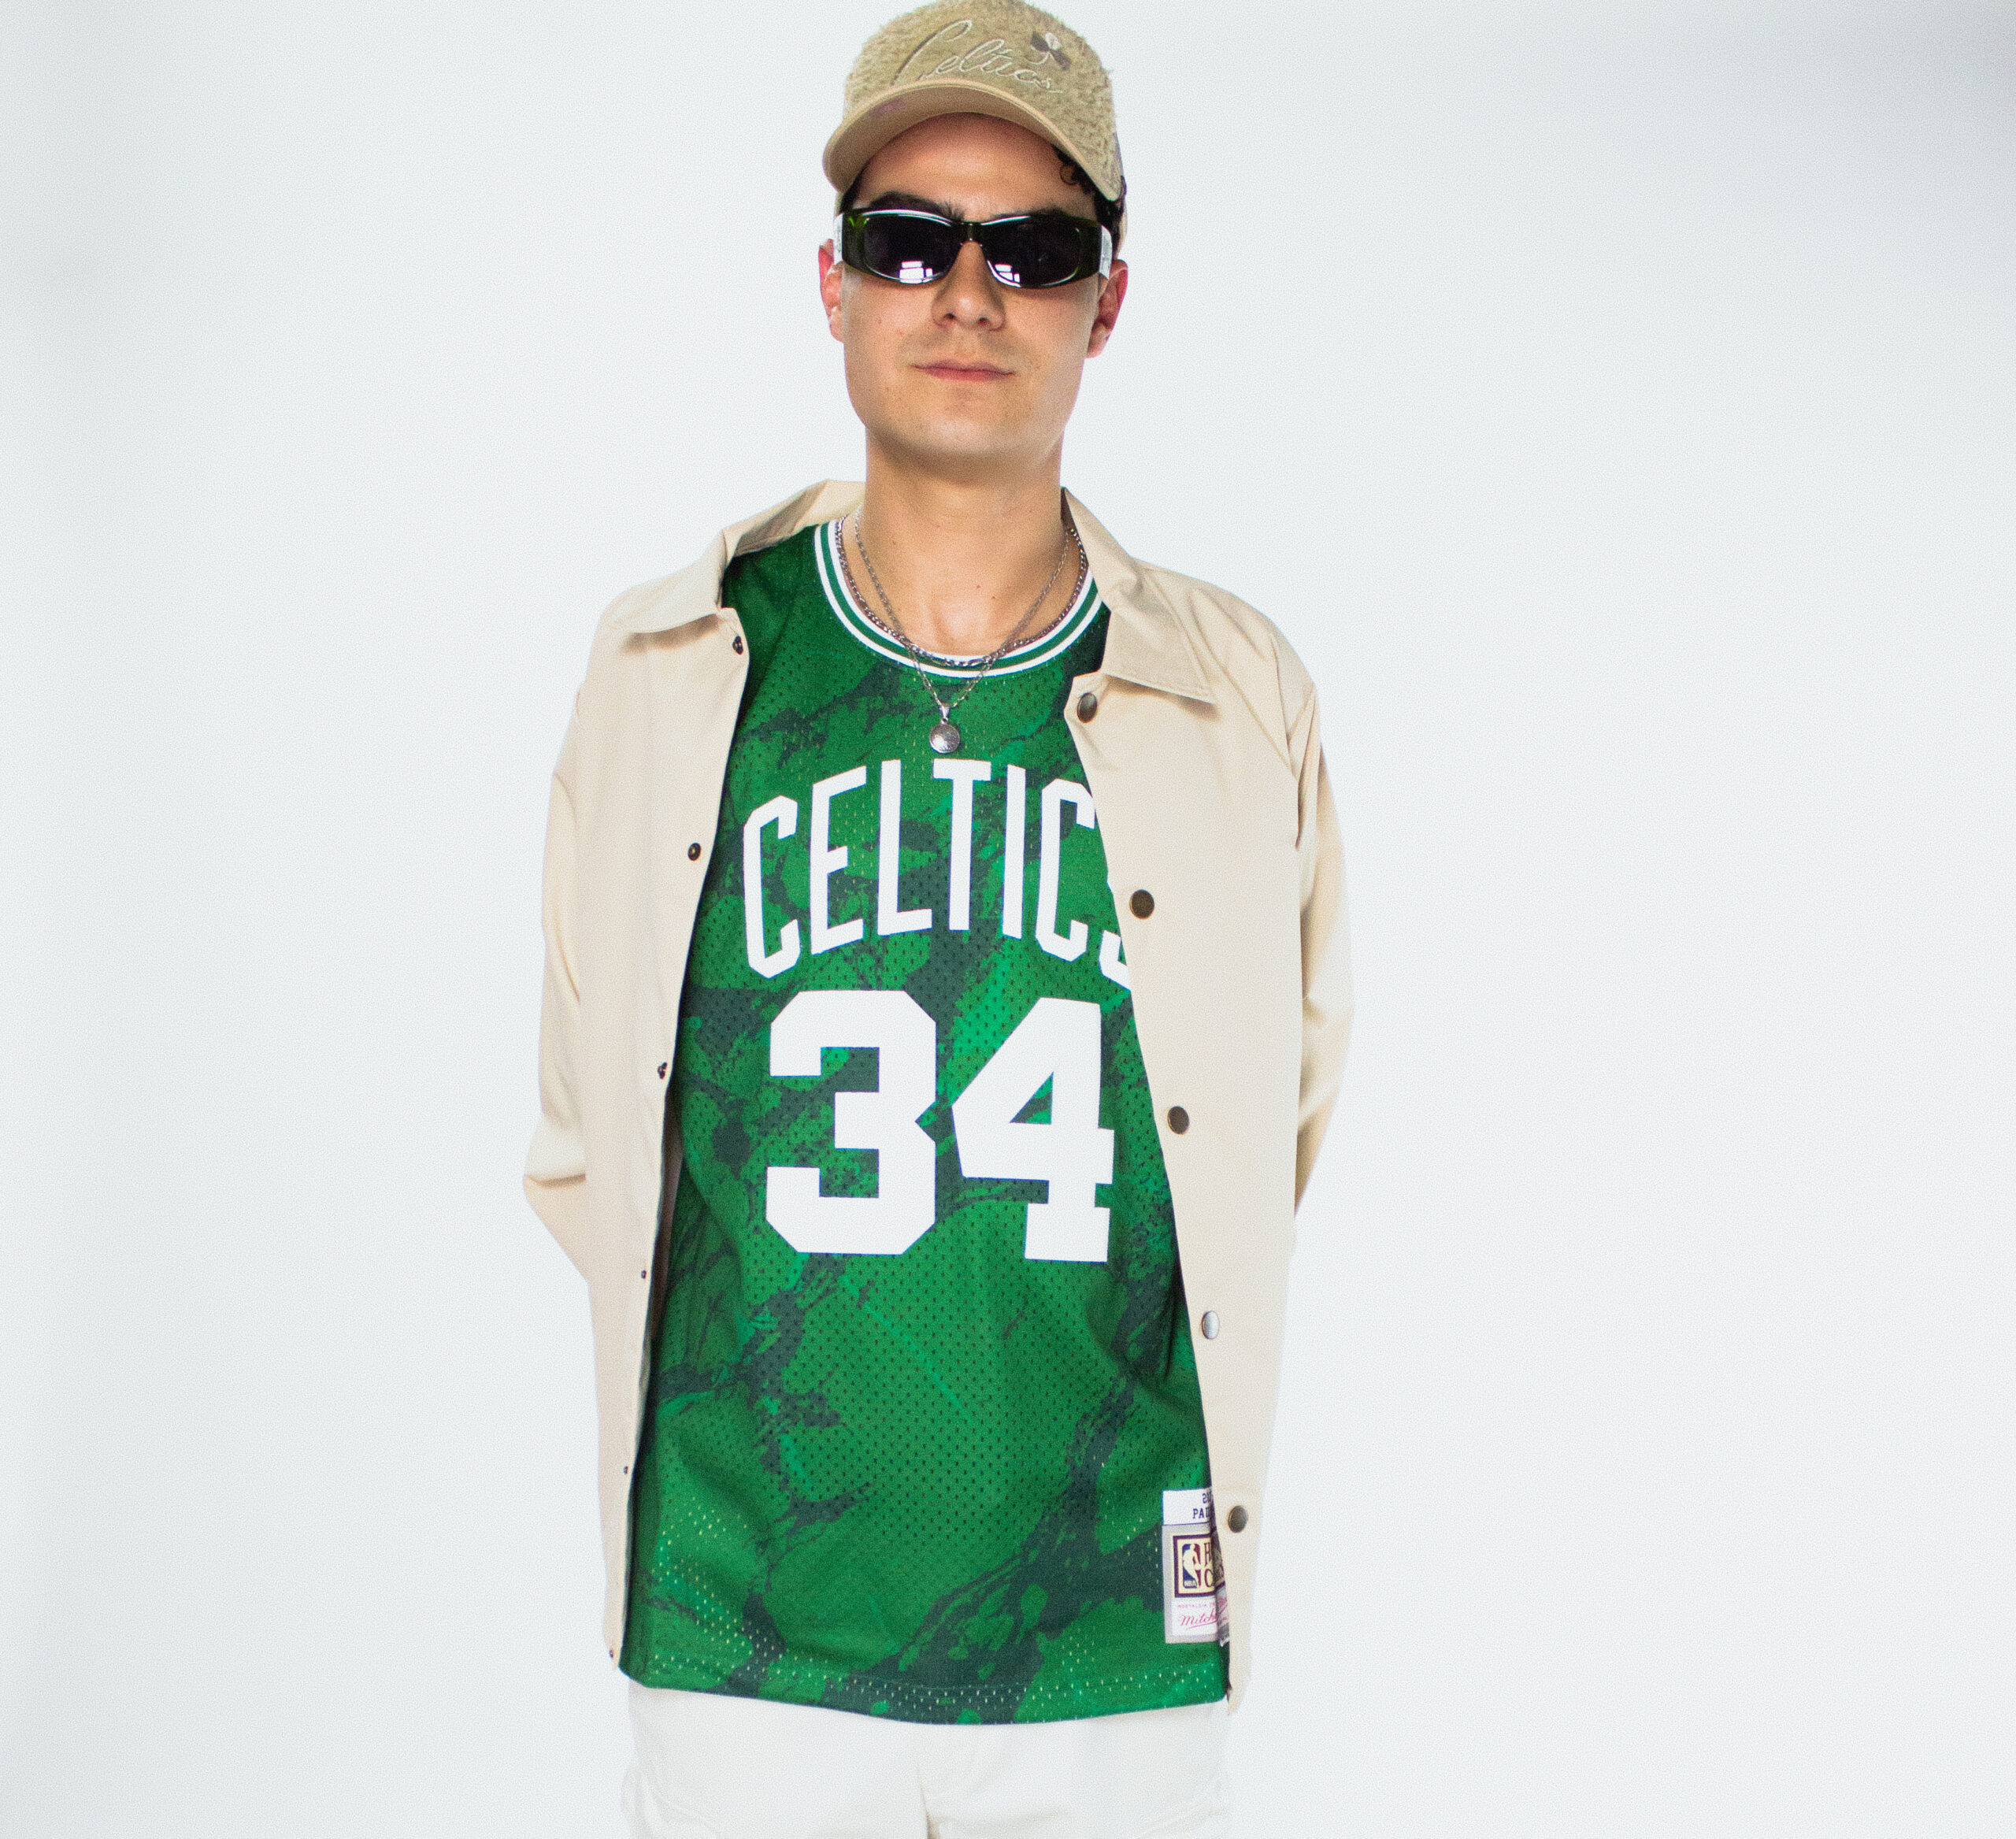 Team Marble llega a Mitchell & Ness